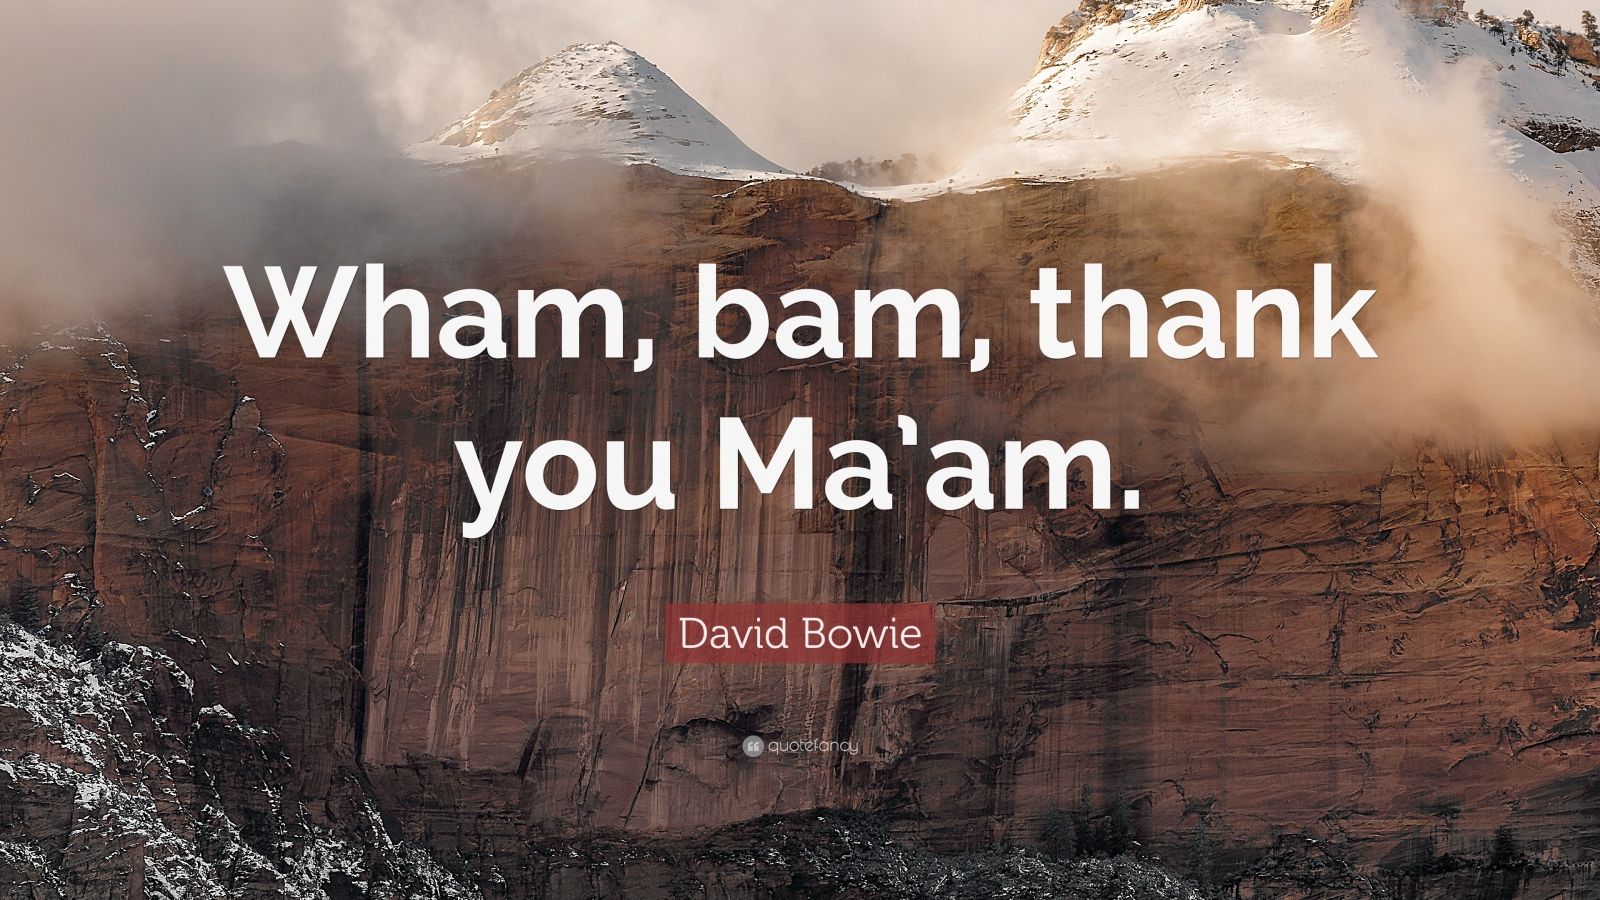 David Bowie Quote “wham Bam Thank You Maam” 7 Wallpapers Quotefancy 9597